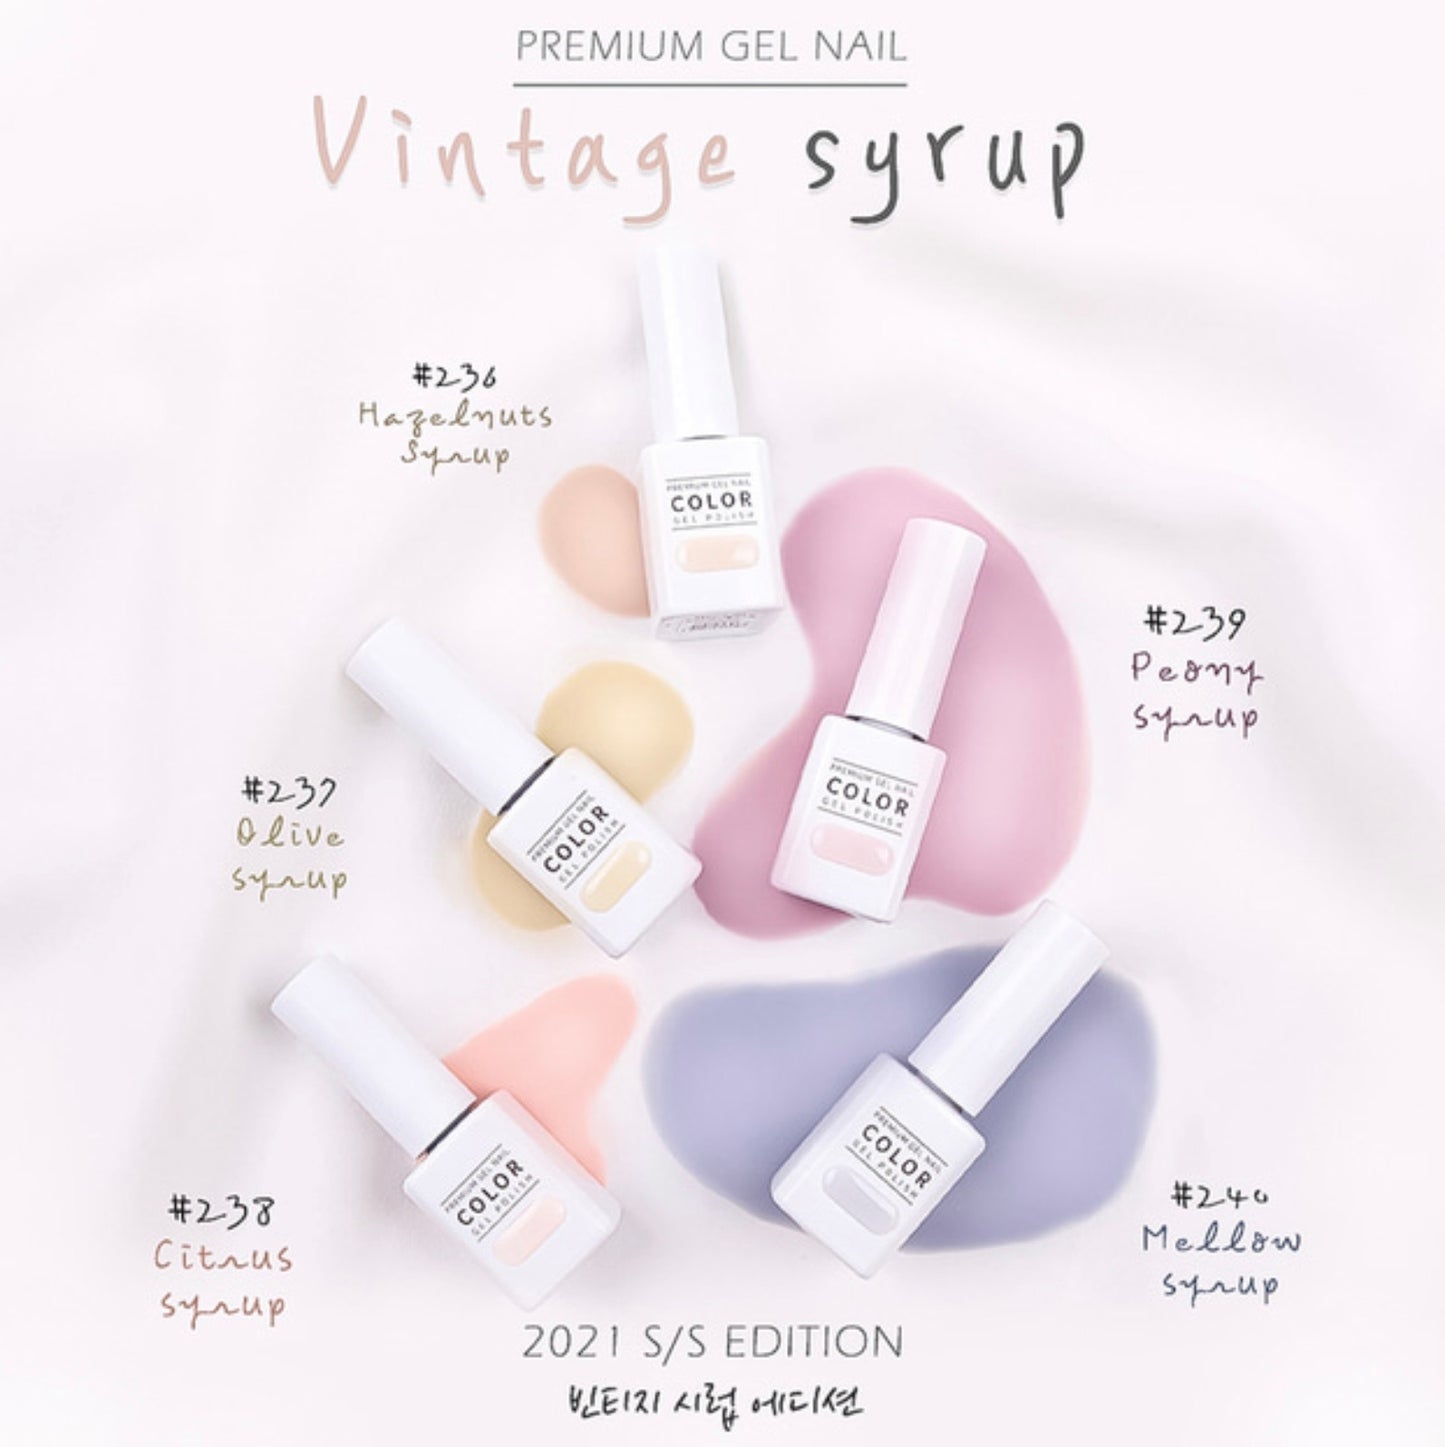 THE GEL Vintage syrup collection